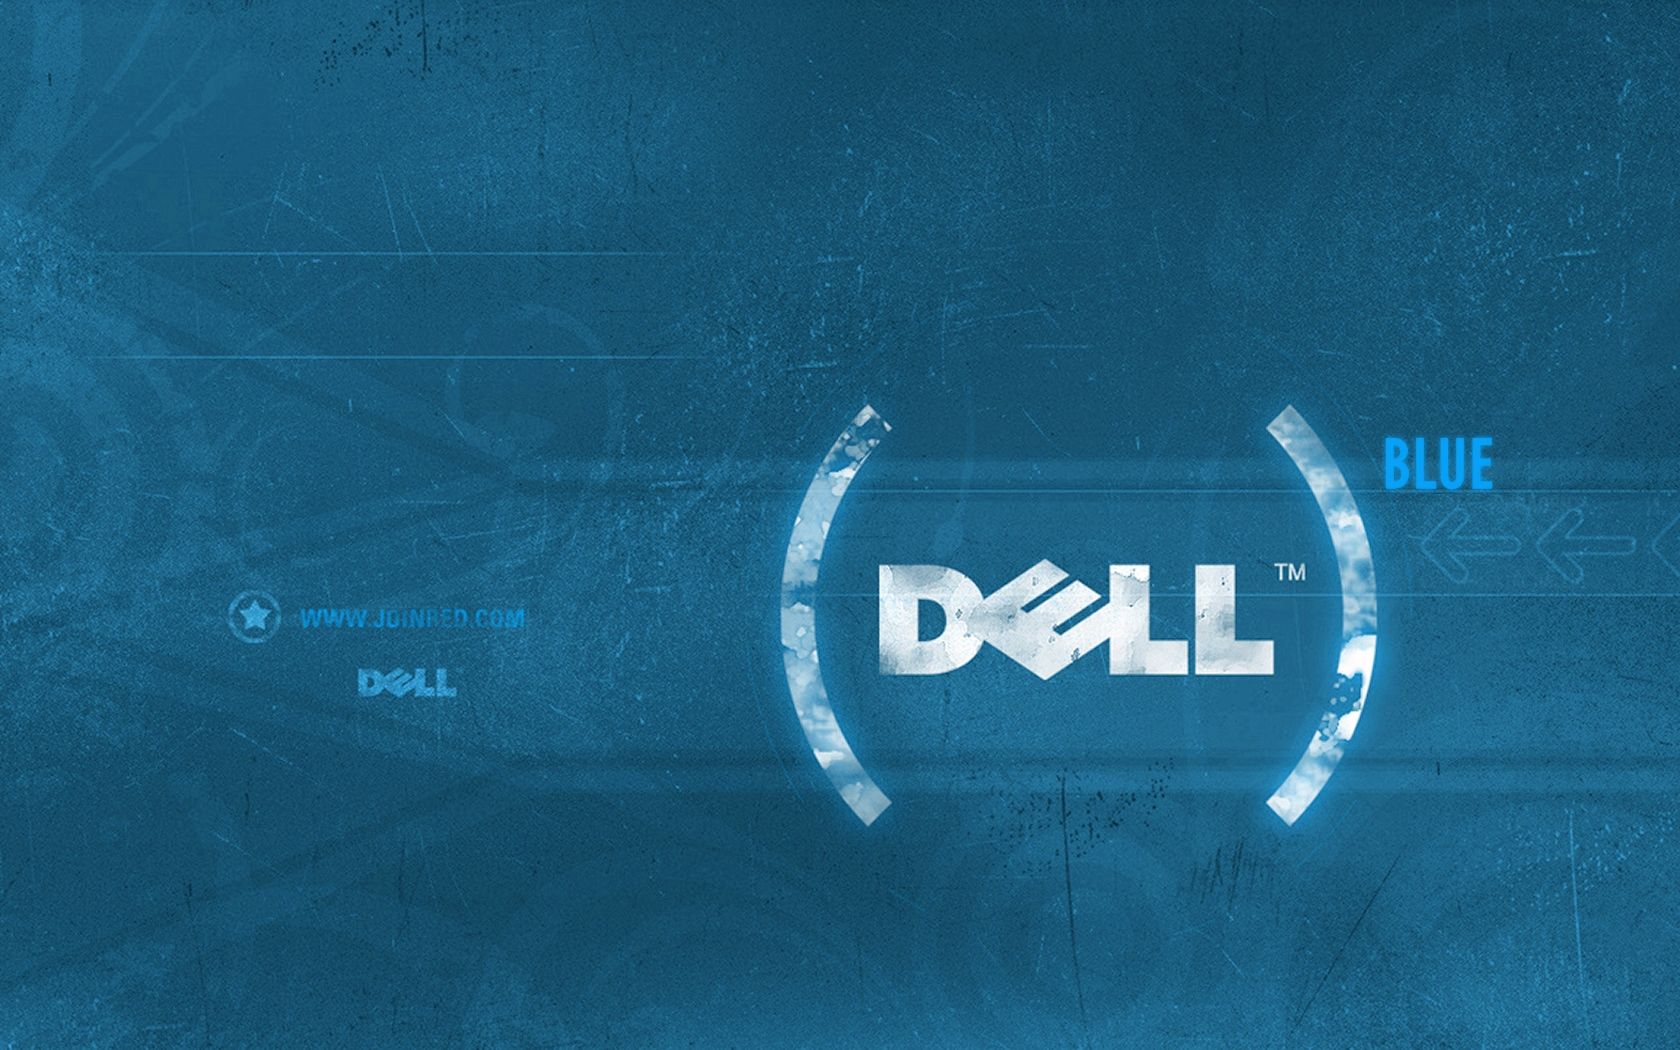 HD Dell Background Wallpaper Image For Windows Fondos In